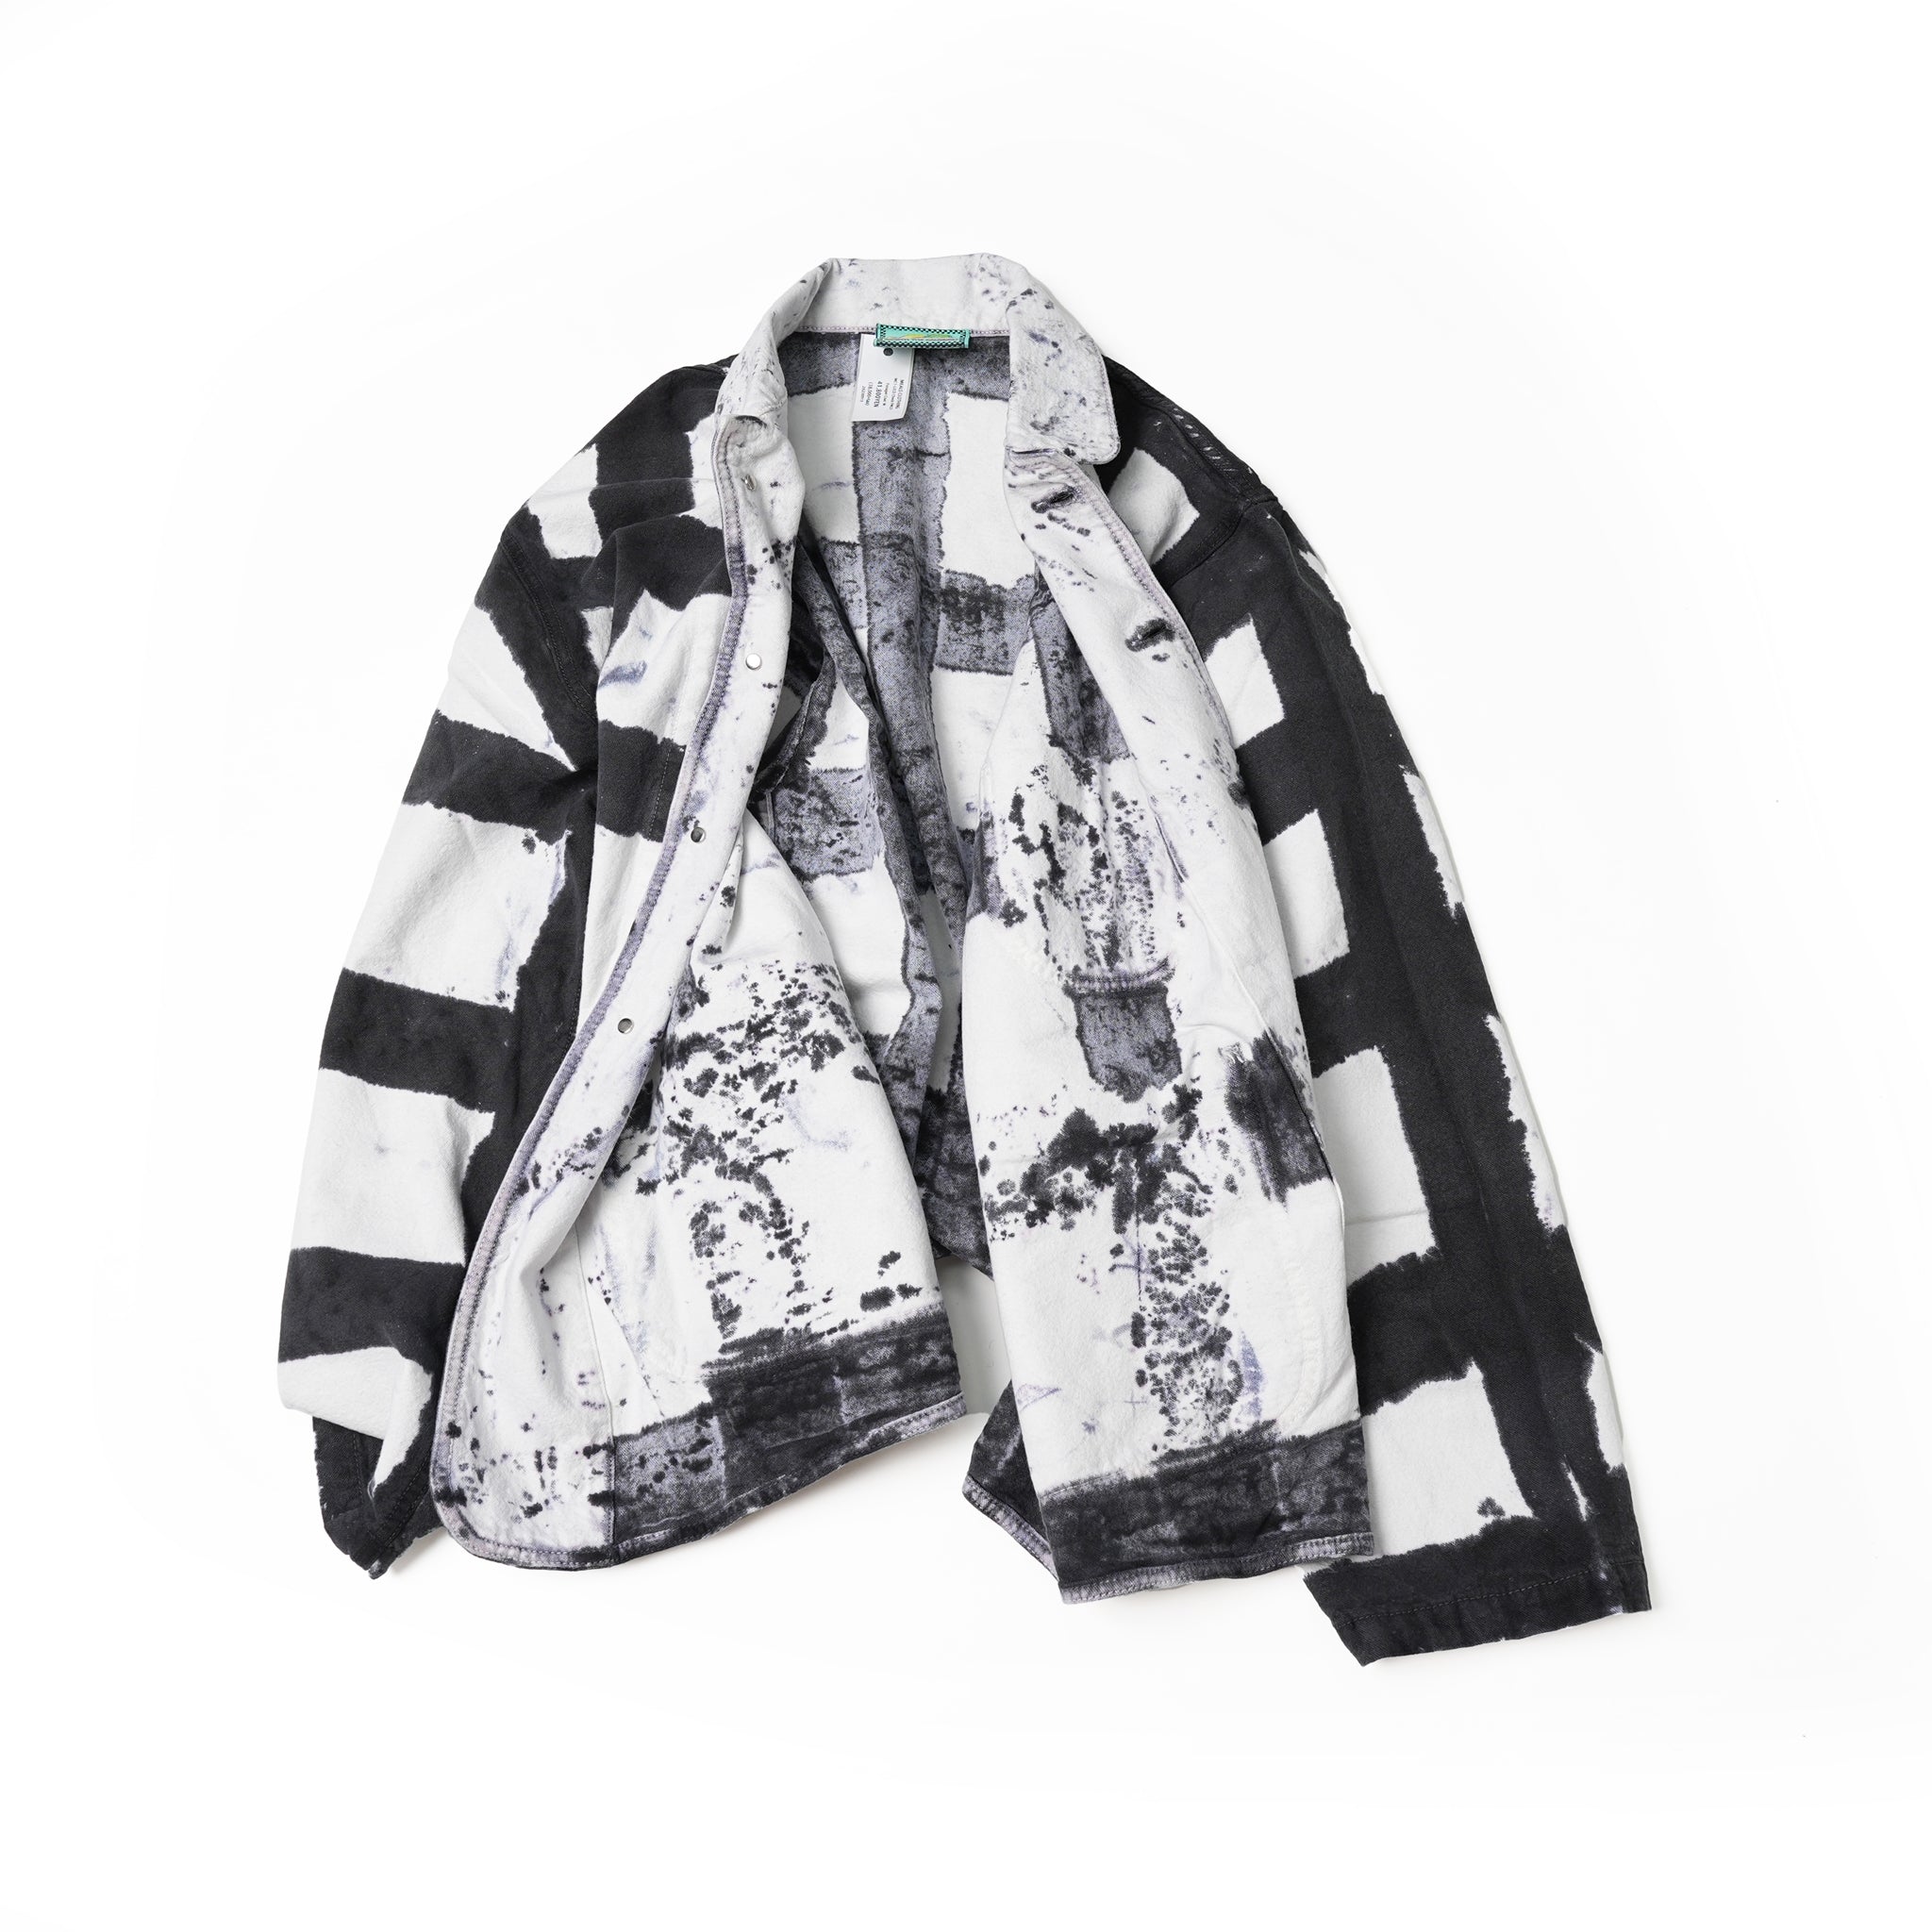 No:MC2-LICOCheck FW23 | Name:Forager Coat | Color: Licorice Check【MEALS CLOTHING_ミールズクロージング】